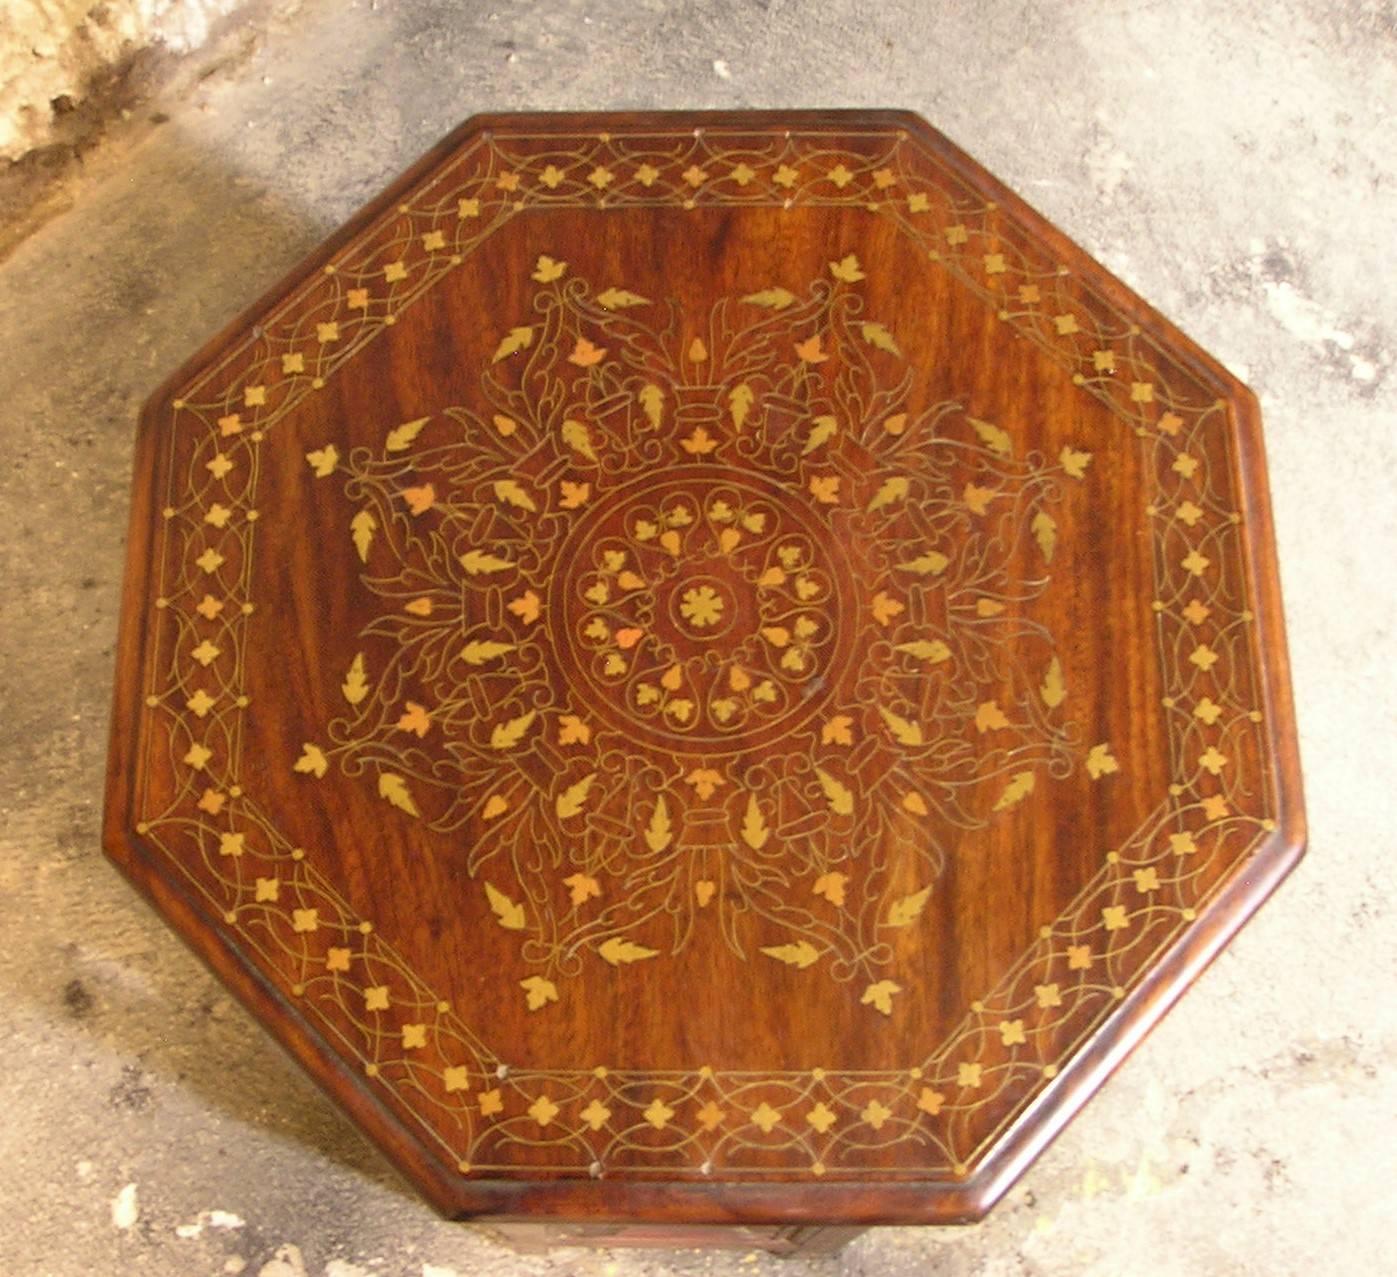 Pair of finely carved and inlaid Anglo-Indian octagonal traveling side or end tables with copper and brass inlay.